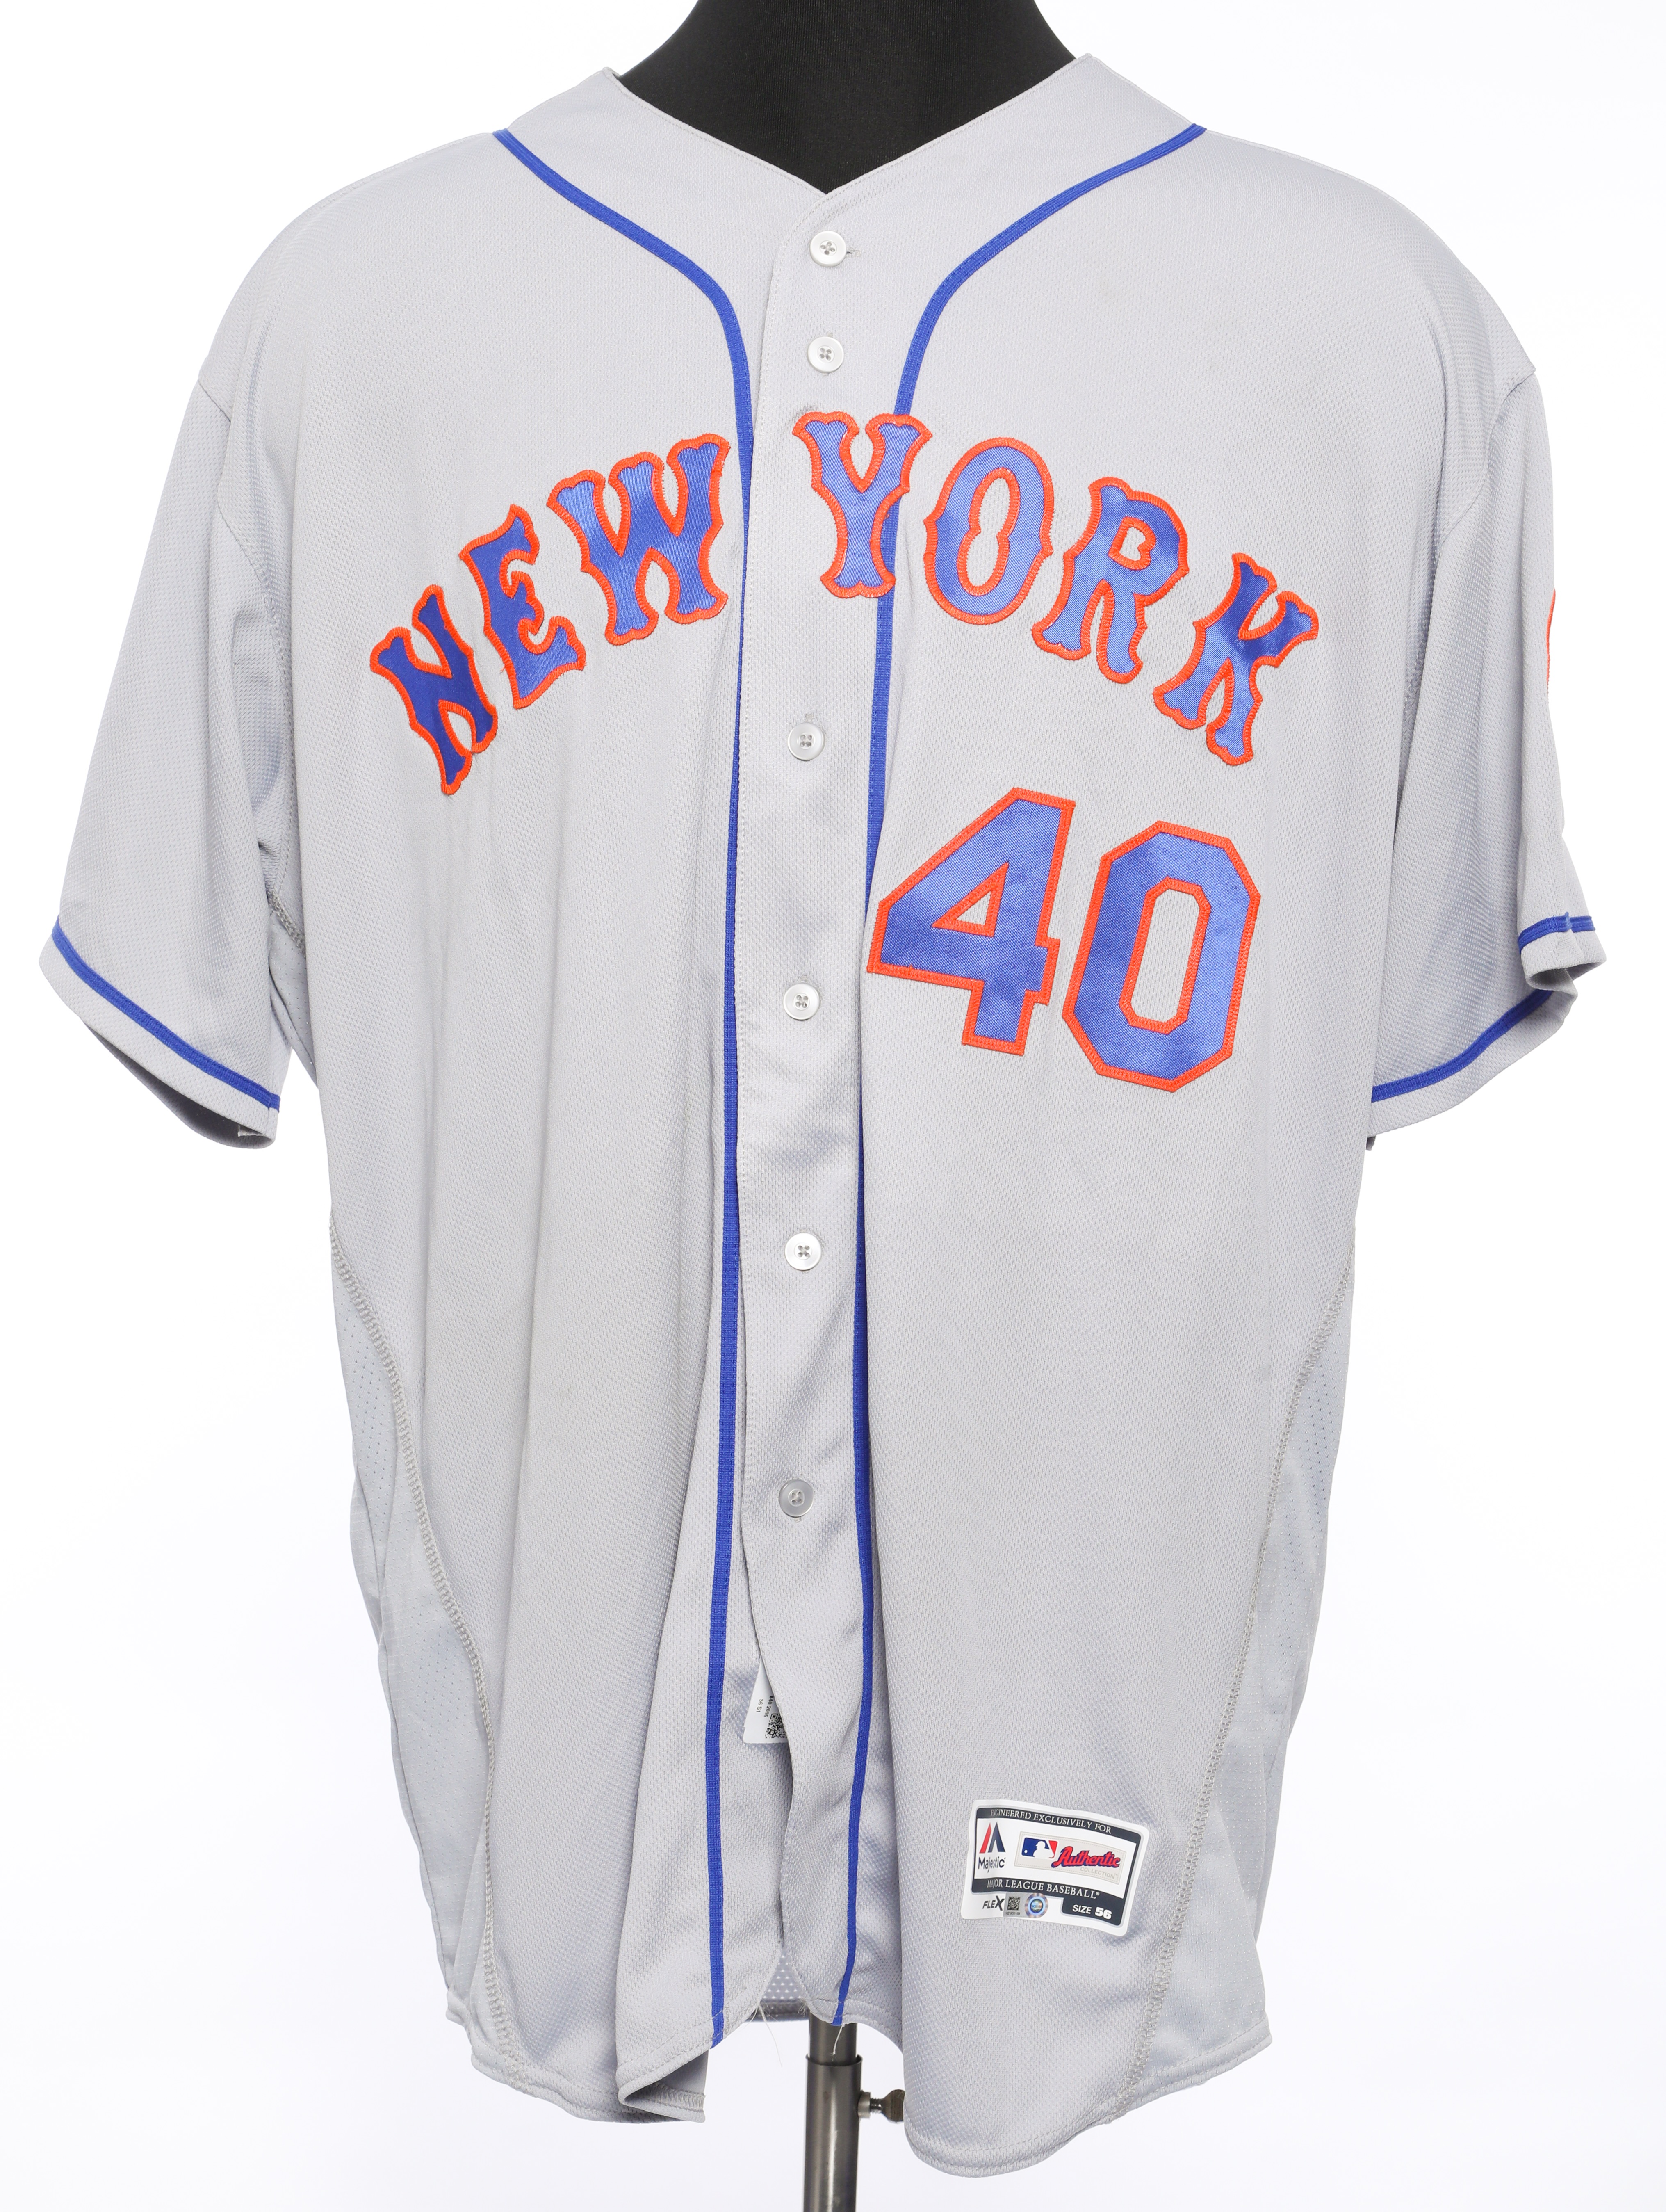 mets game jersey